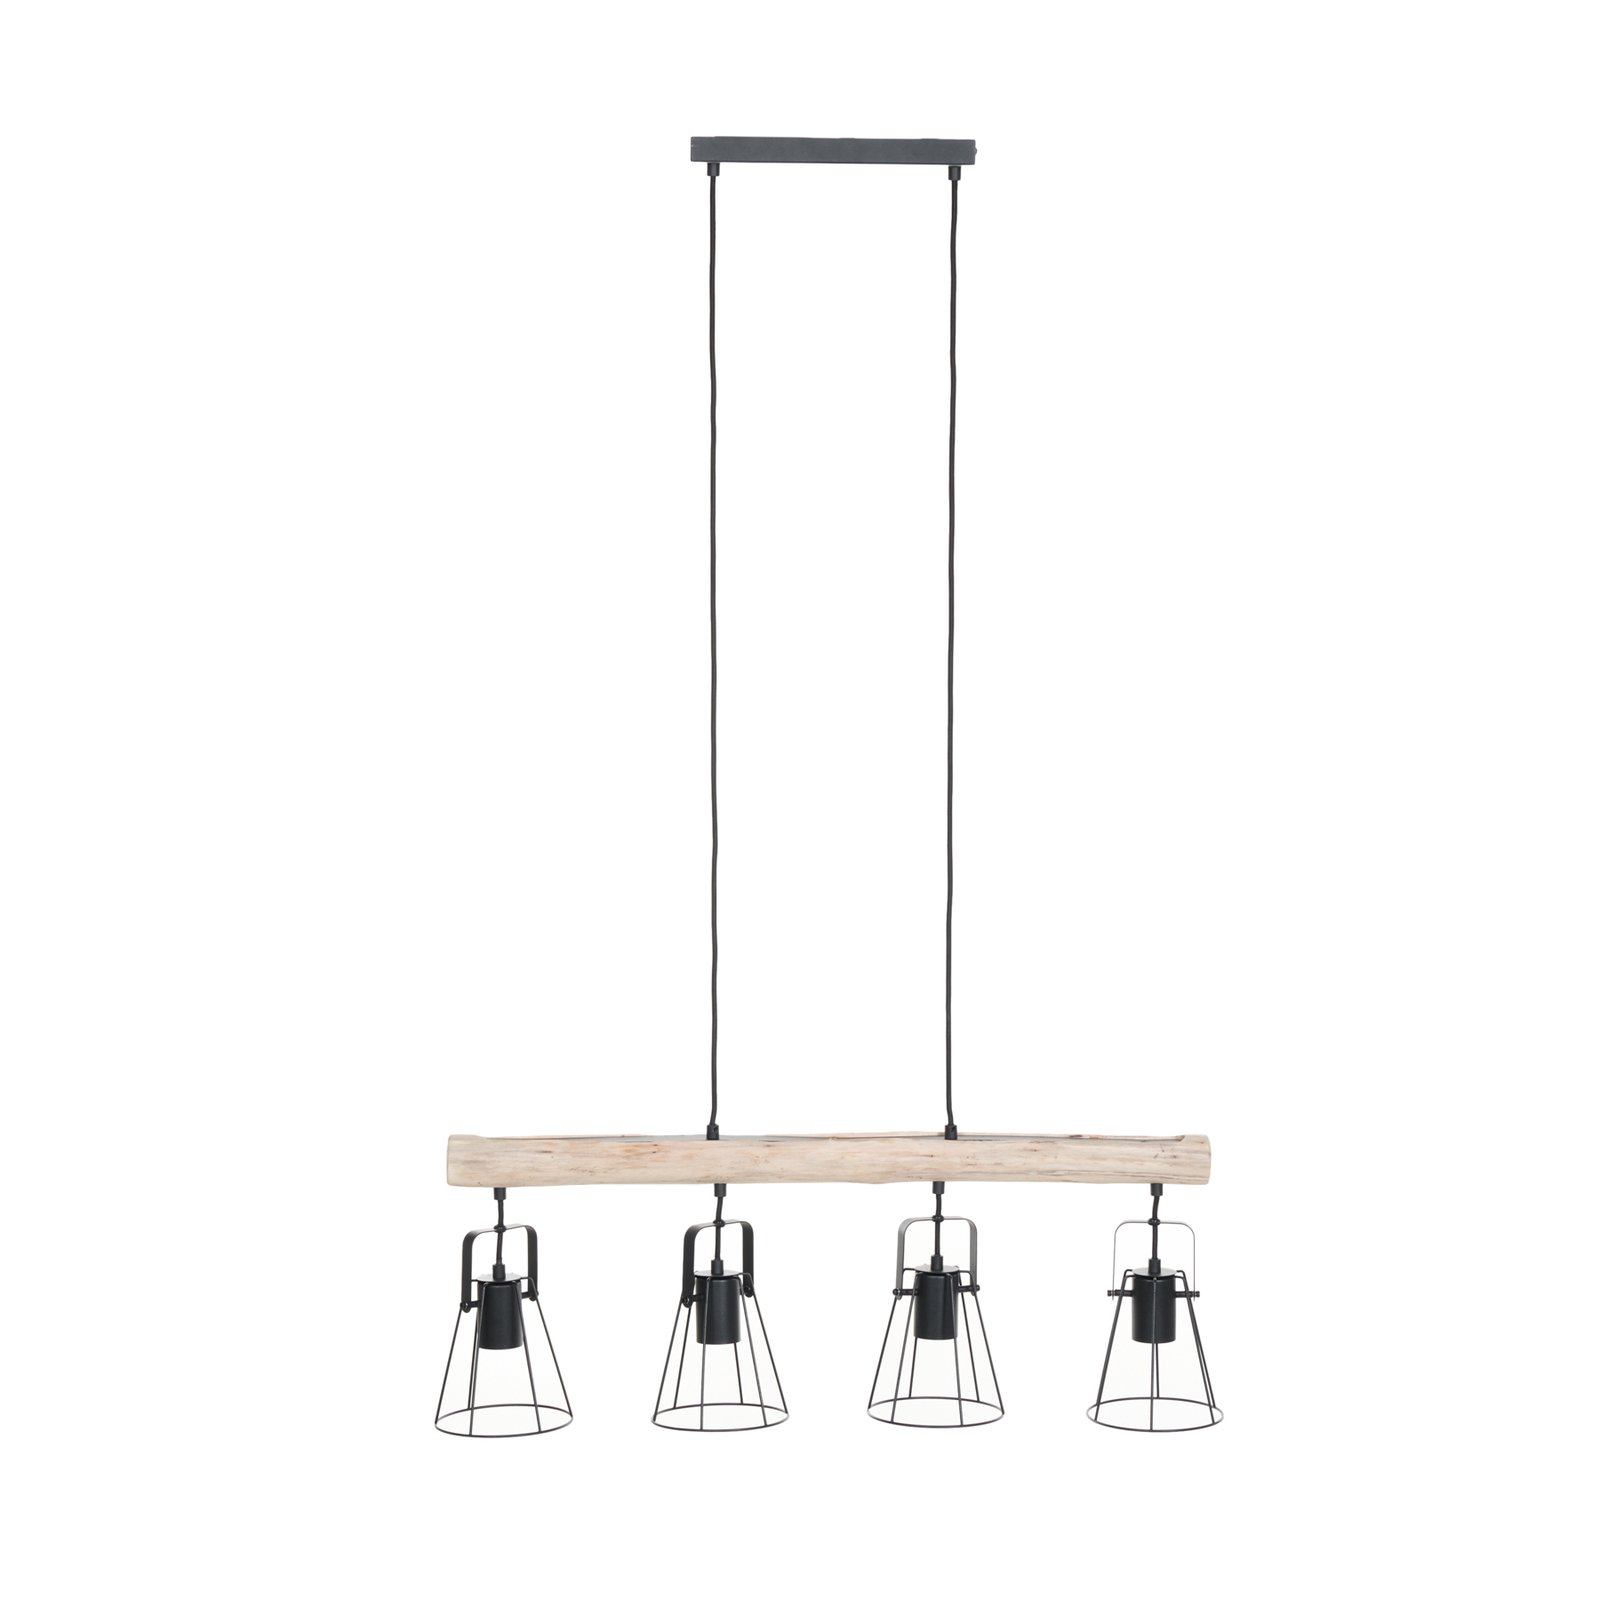 Lindby Riano pendant light, cages, four-bulb